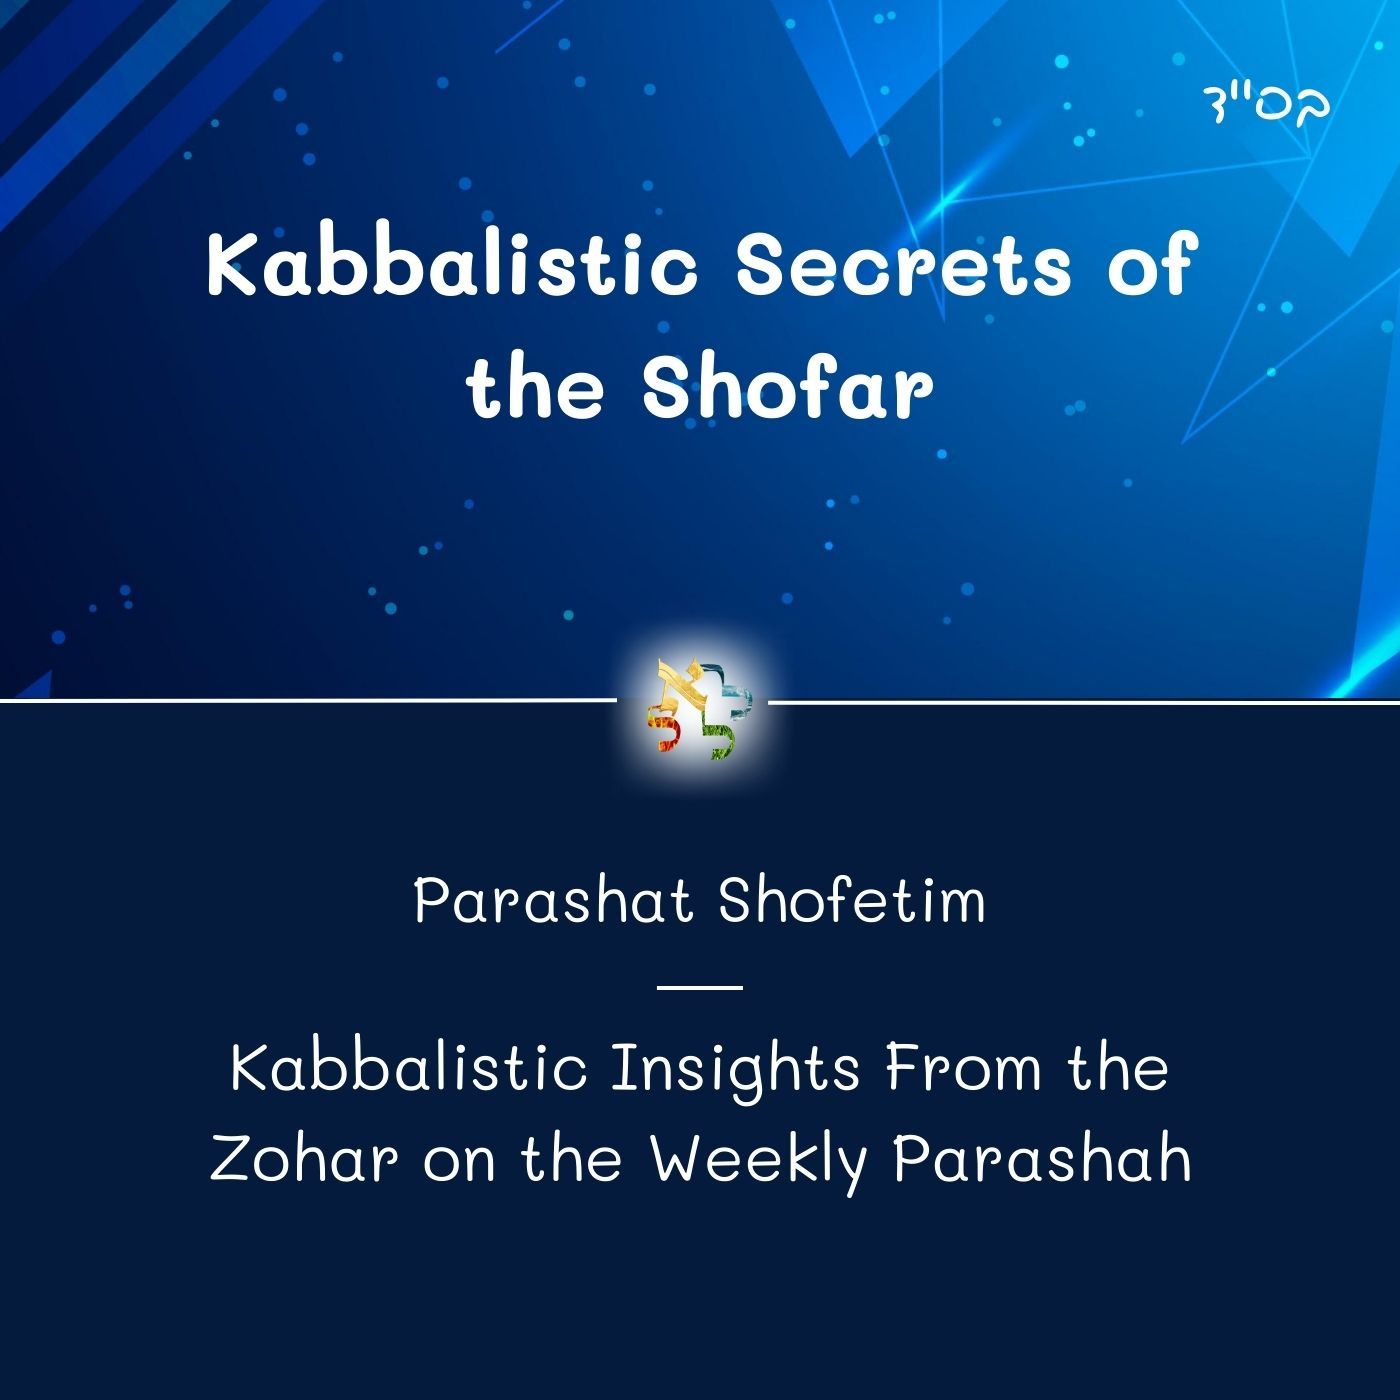 Kabbalistic Secrets of the Shofar - Kabbalistic Inspiration on the Parasha from the Zohar